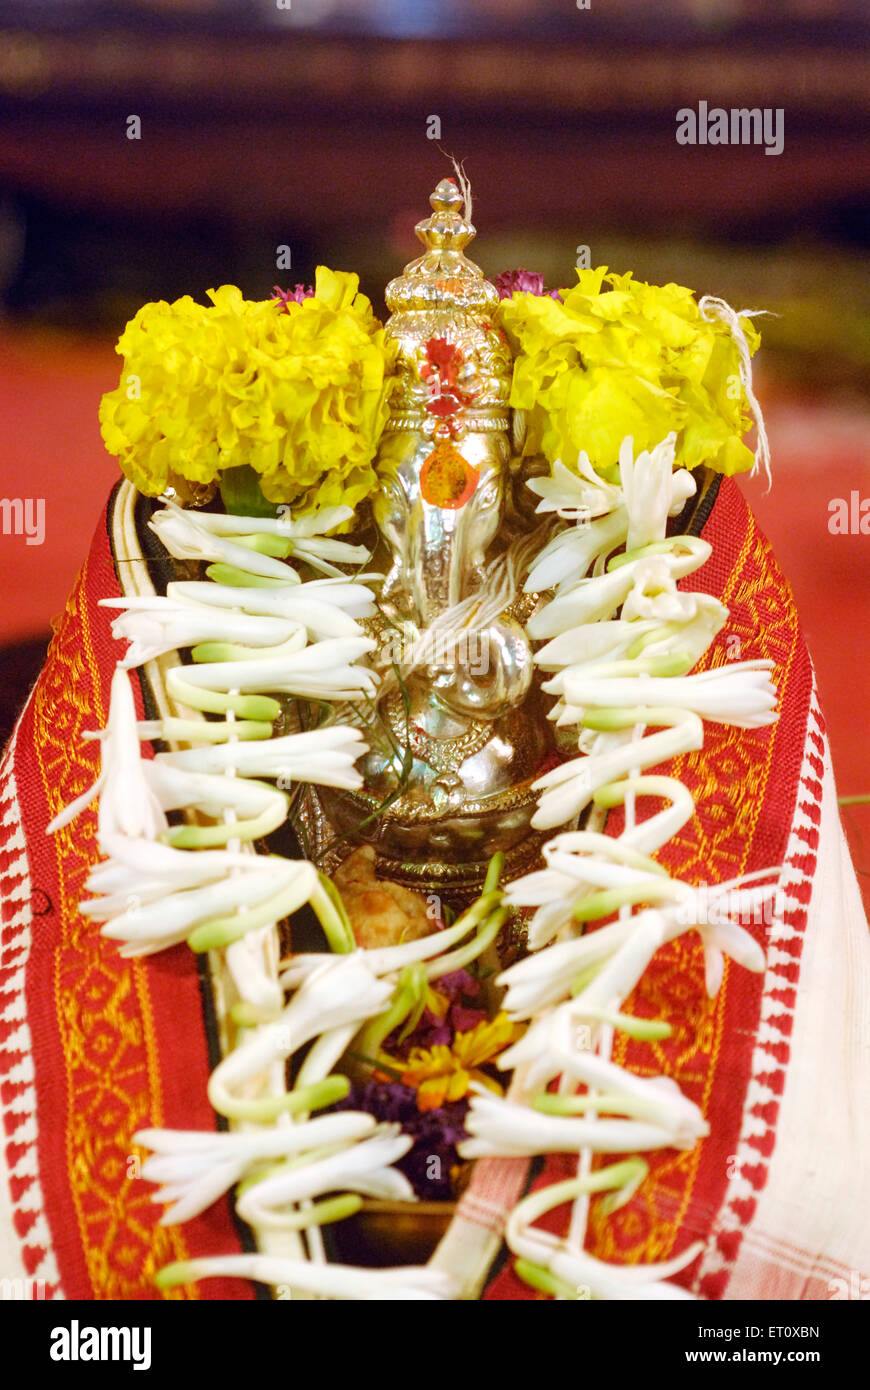 Richly decorated silver metal idol of lord Ganesh elephant headed God ; Ganapati festival year 2008 at Pune Stock Photo